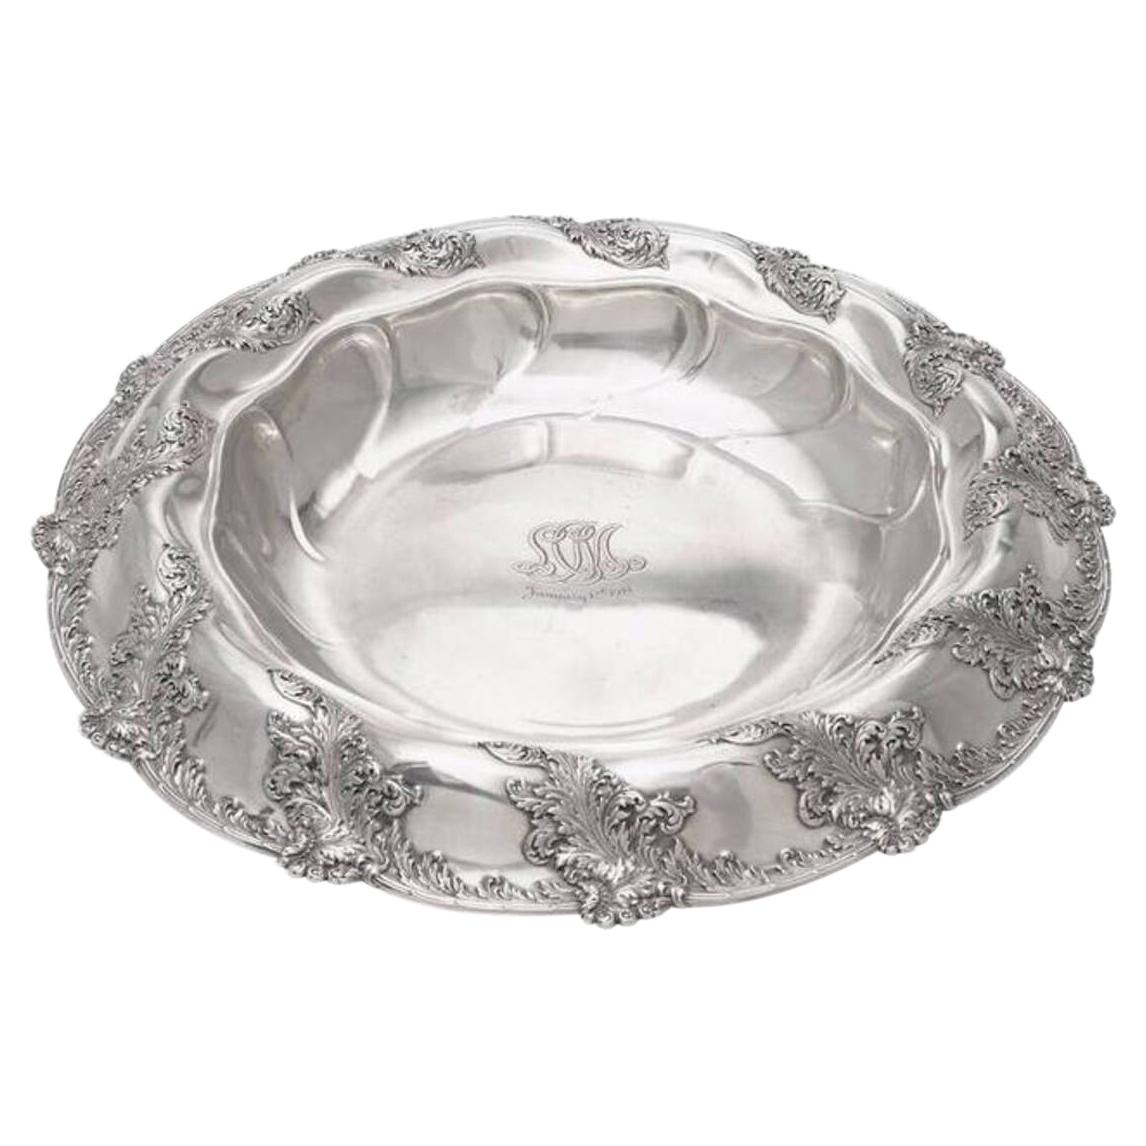 Tiffany & Co. Large 1895 Sterling Silver Centerpiece Bowl